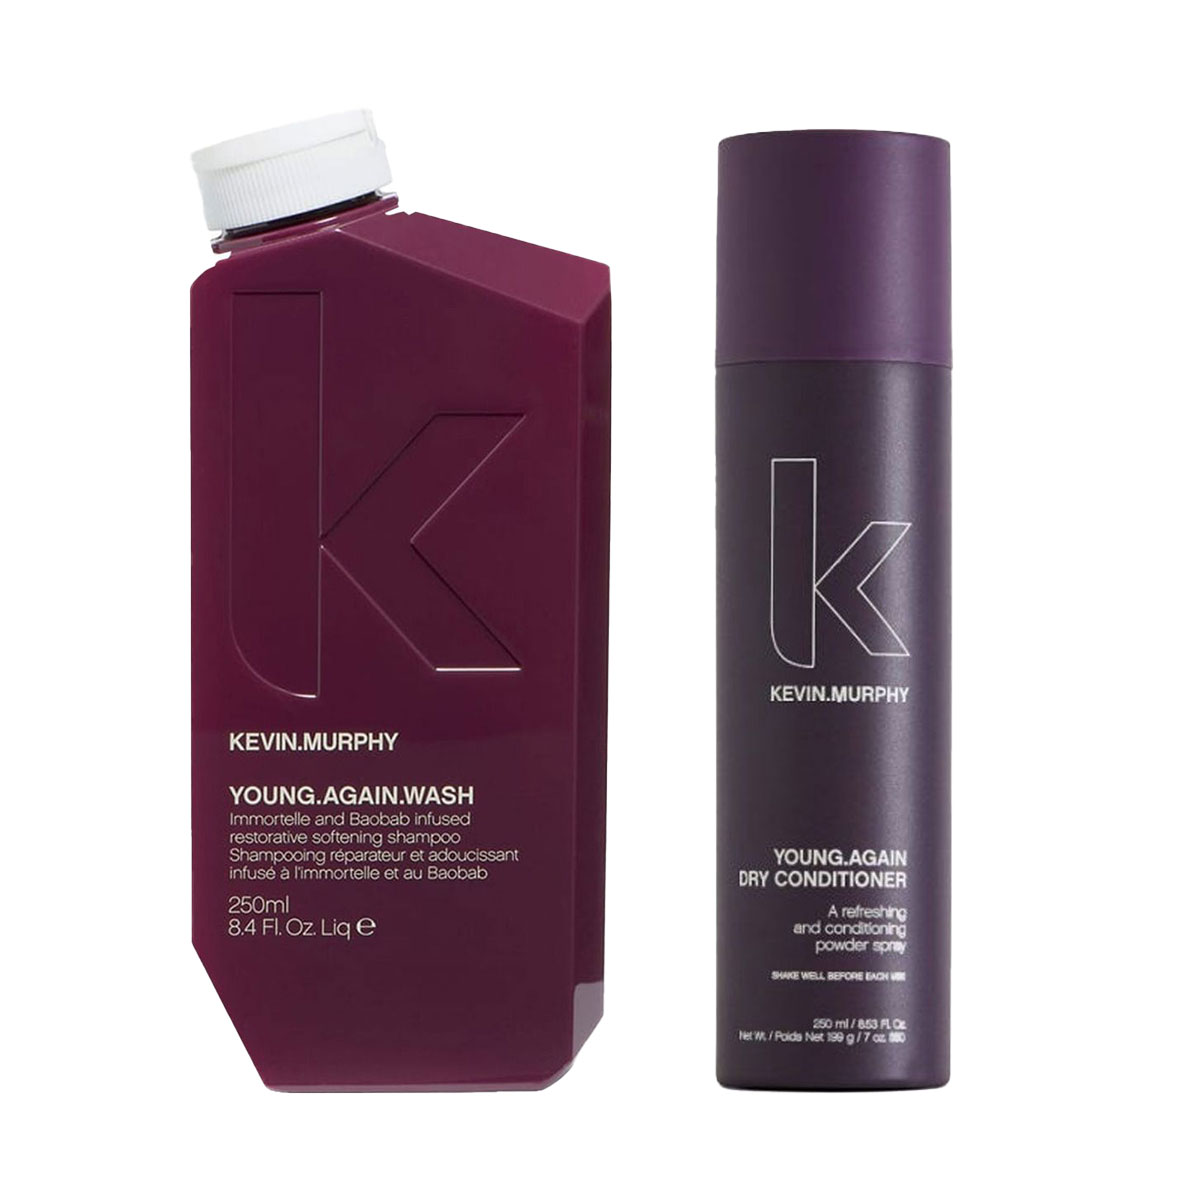 Kevin Murphy Young Again | Anti-Aging